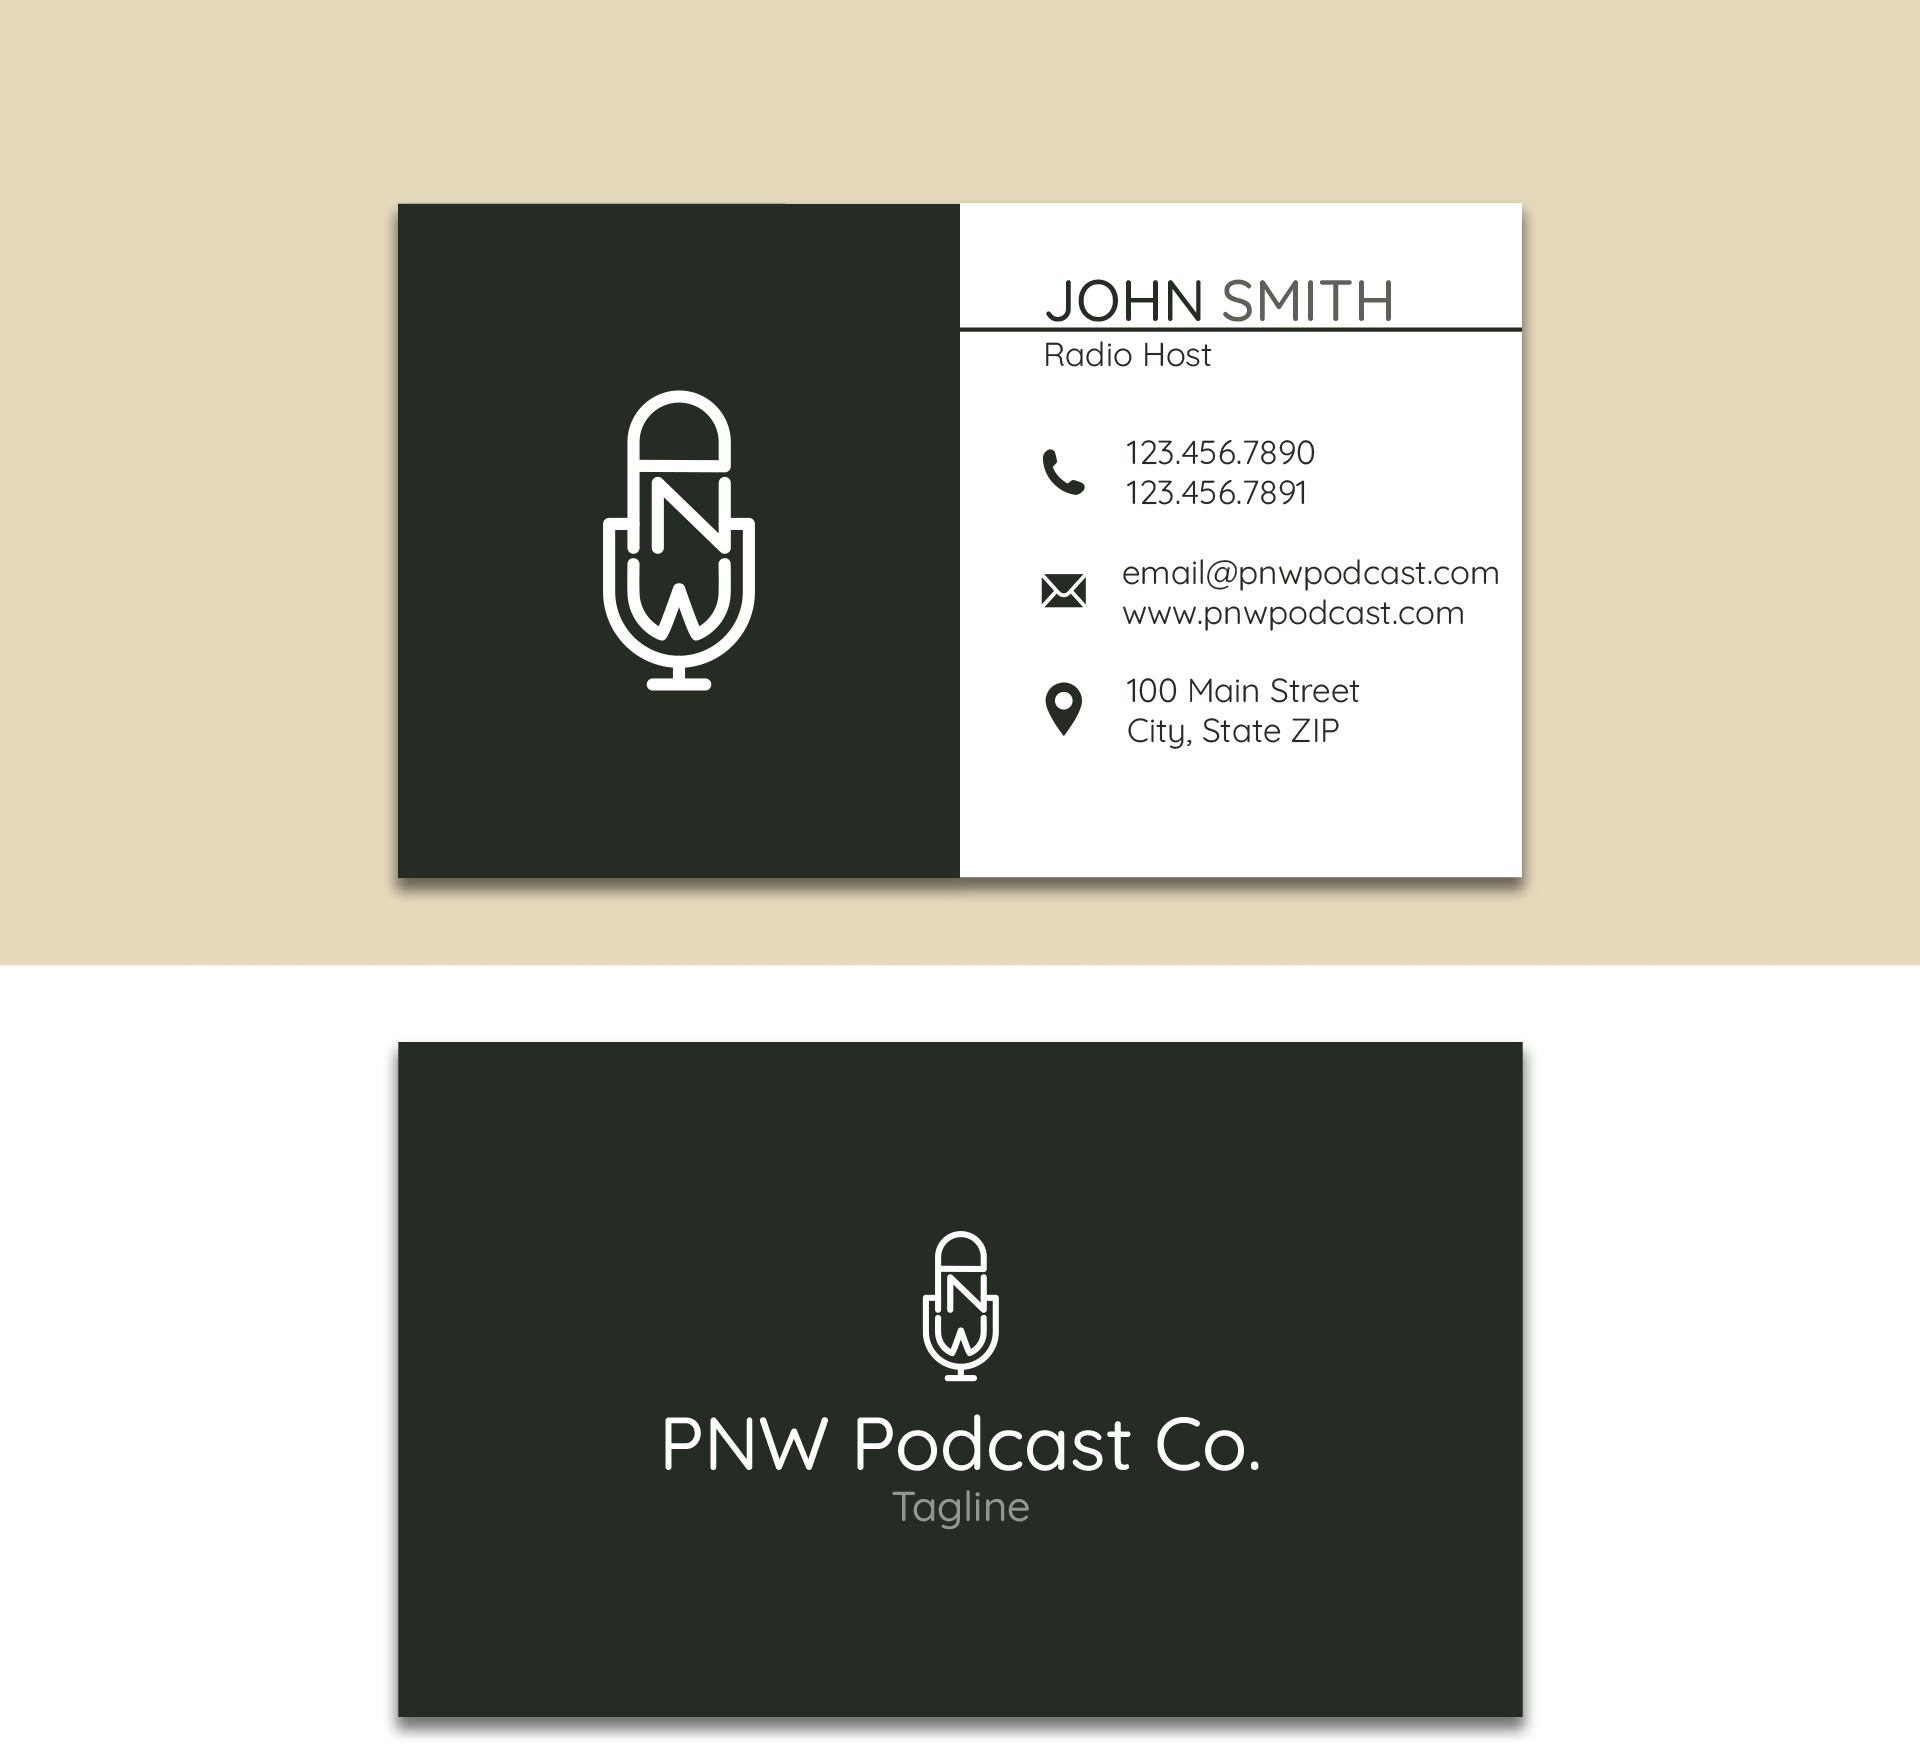 Business card for PNW Podcast Co.